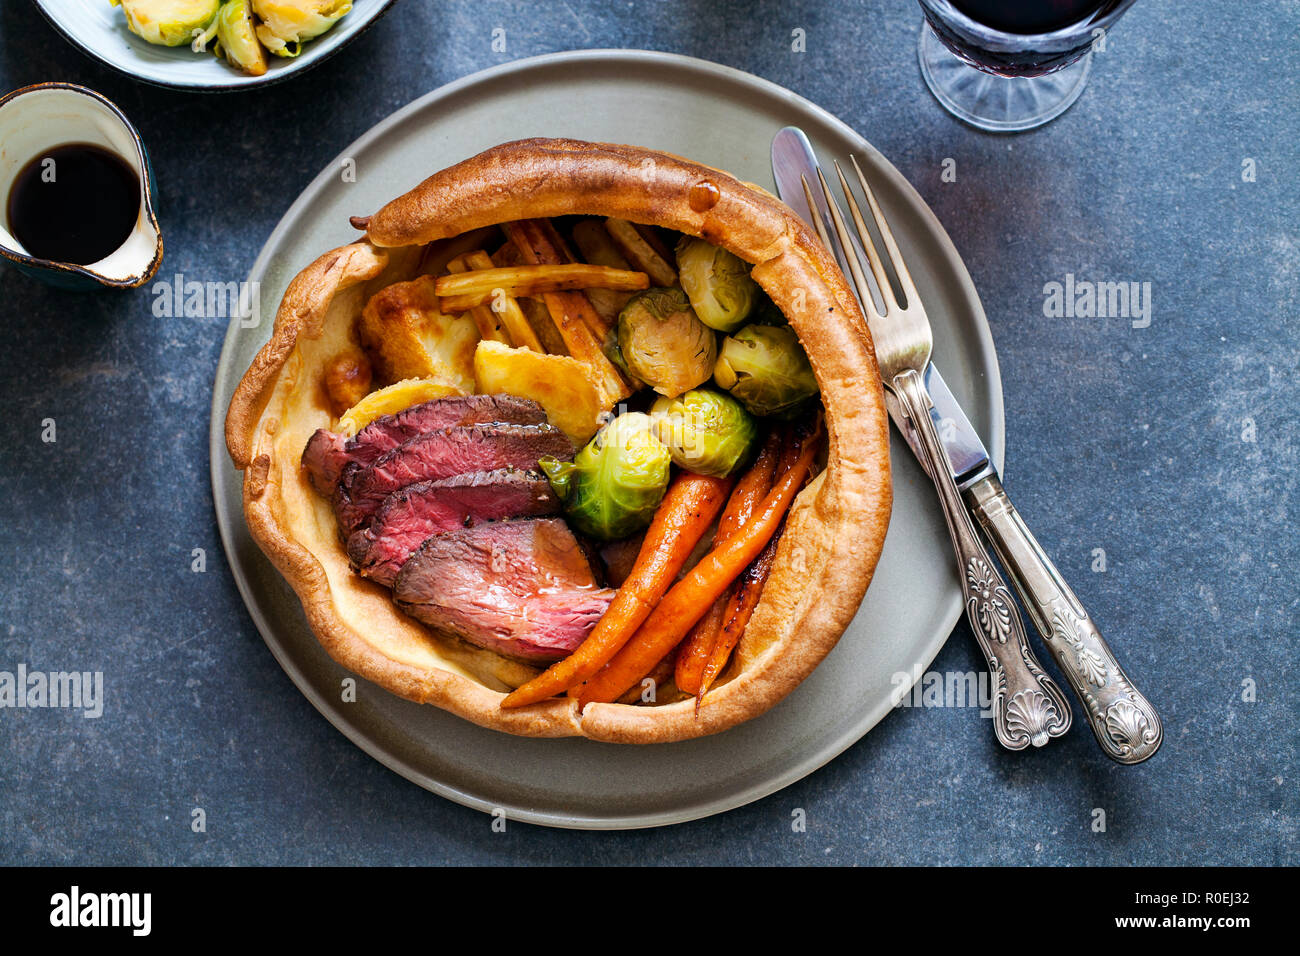 Roast dinner with beef, carrots, brussel sprouts in giant yorkshire pudding Stock Photo